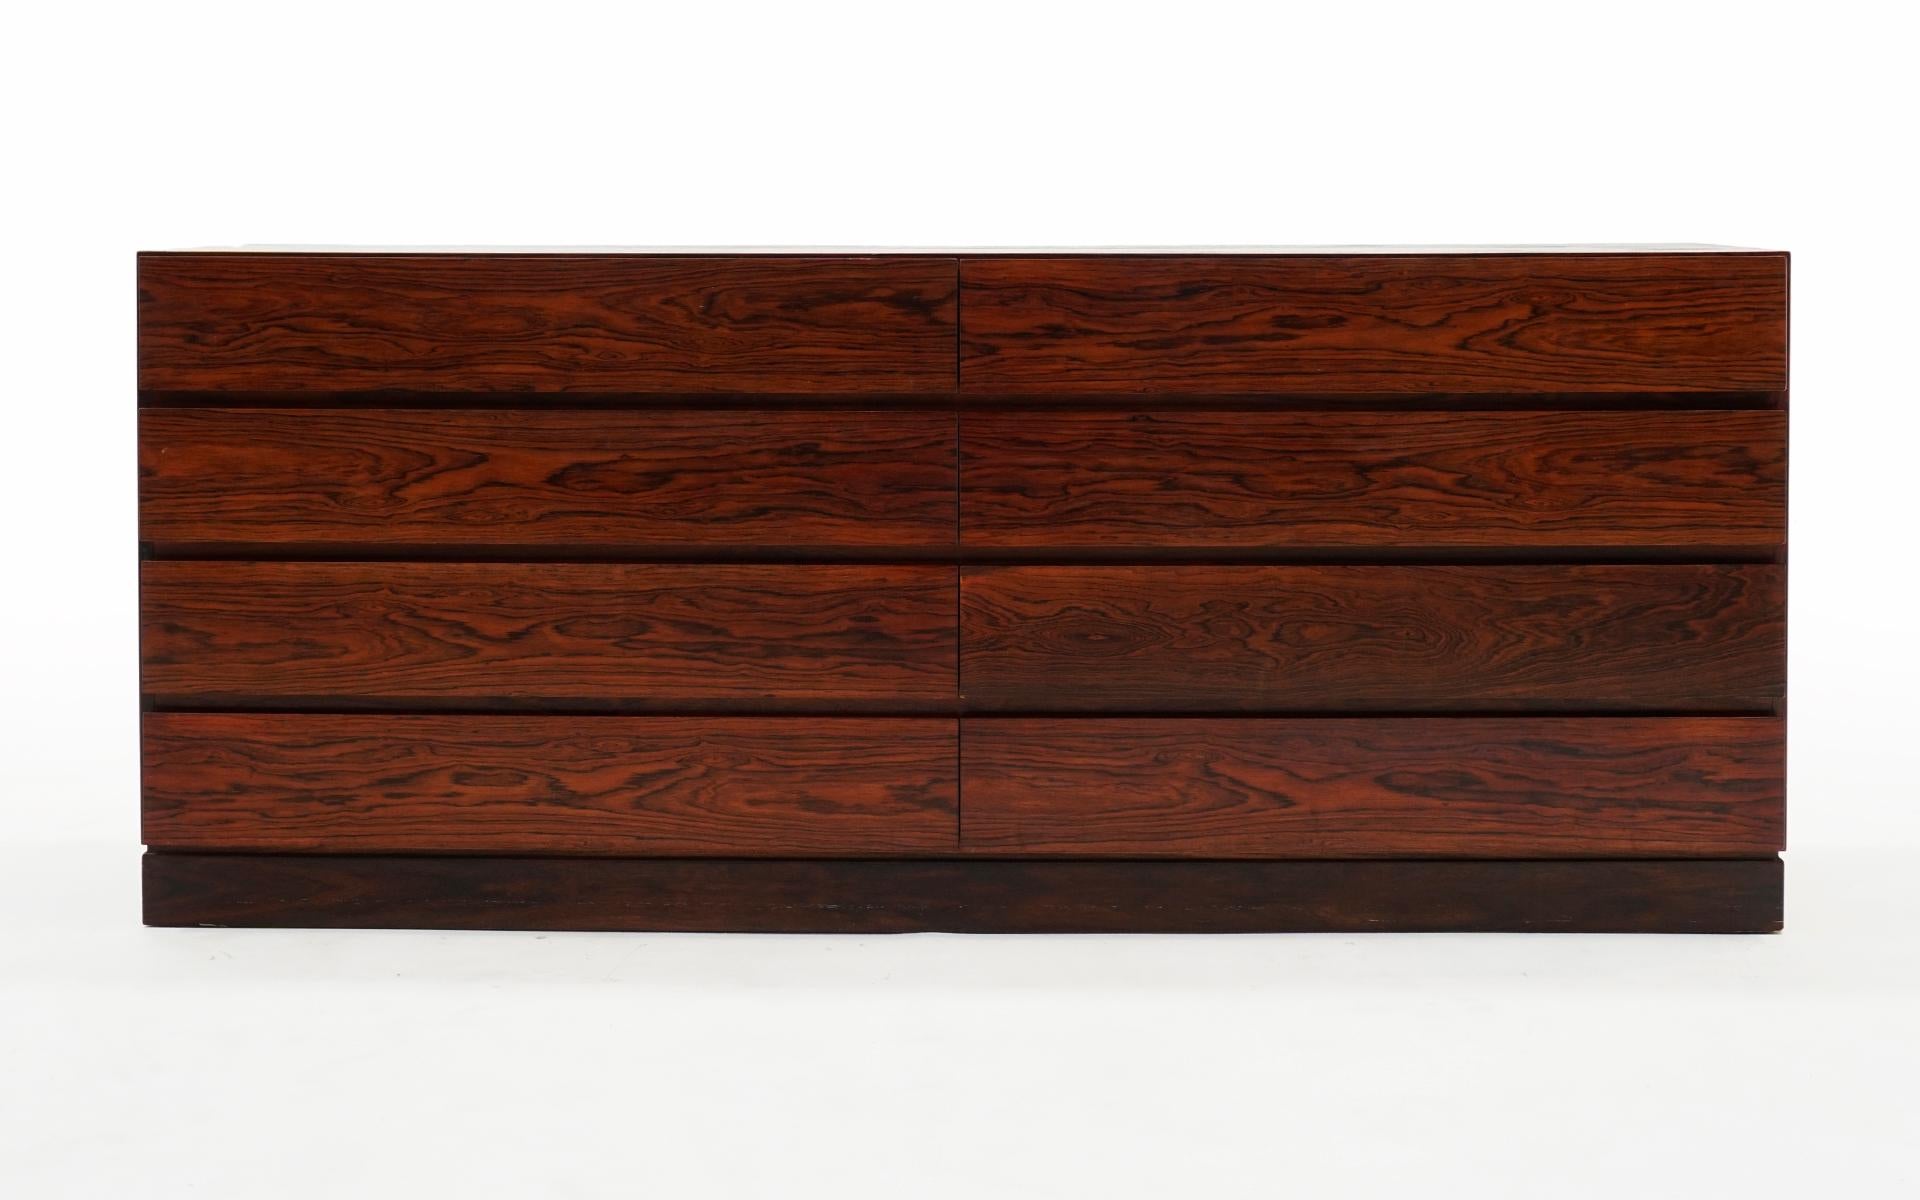 Eight (8) Drawer Dresser Model 122 designed by Arne Wahl Aversen for Vinde Mobelfabrik in Brazilian rosewood, Denmark, 1970. Very good condition with areas of loss to the bottom edges that are not a distraction. Drawer fronts have minimal signs of